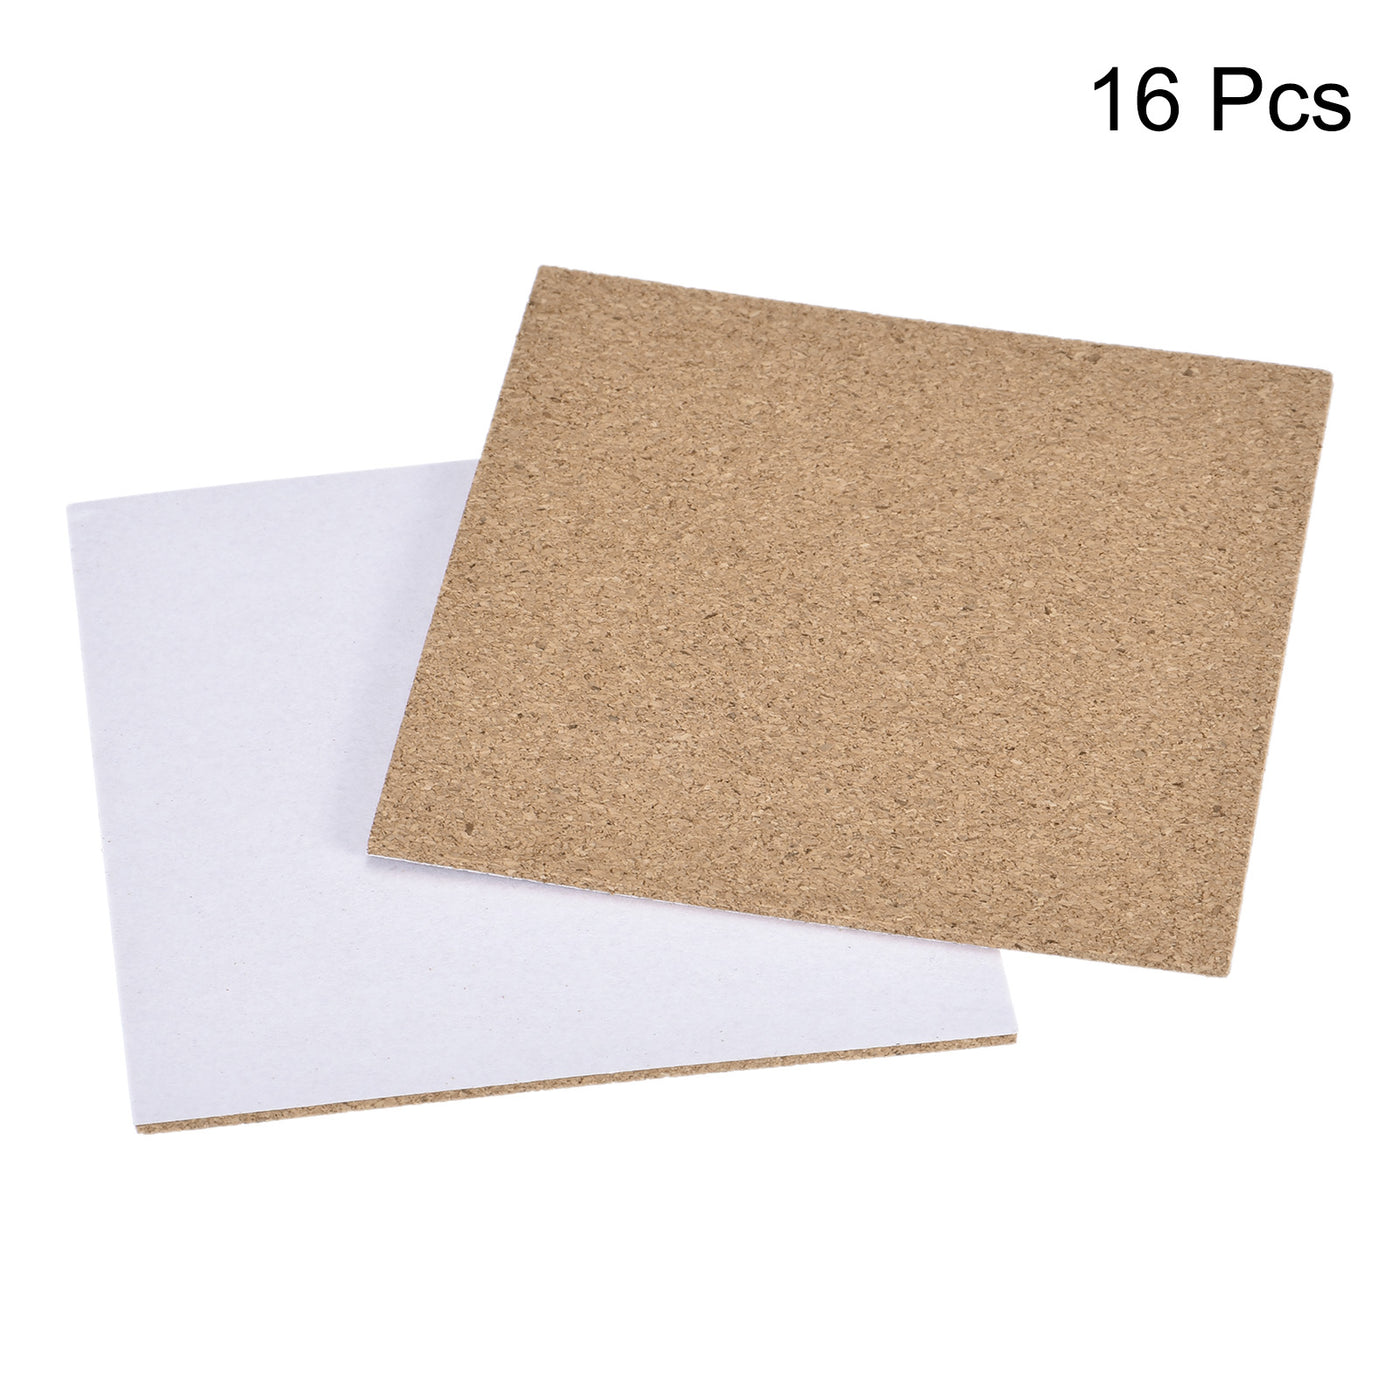 uxcell Uxcell 100x100x2mm Square Coasters Cork Cup Mat Pad Adhesive Backed 16pcs